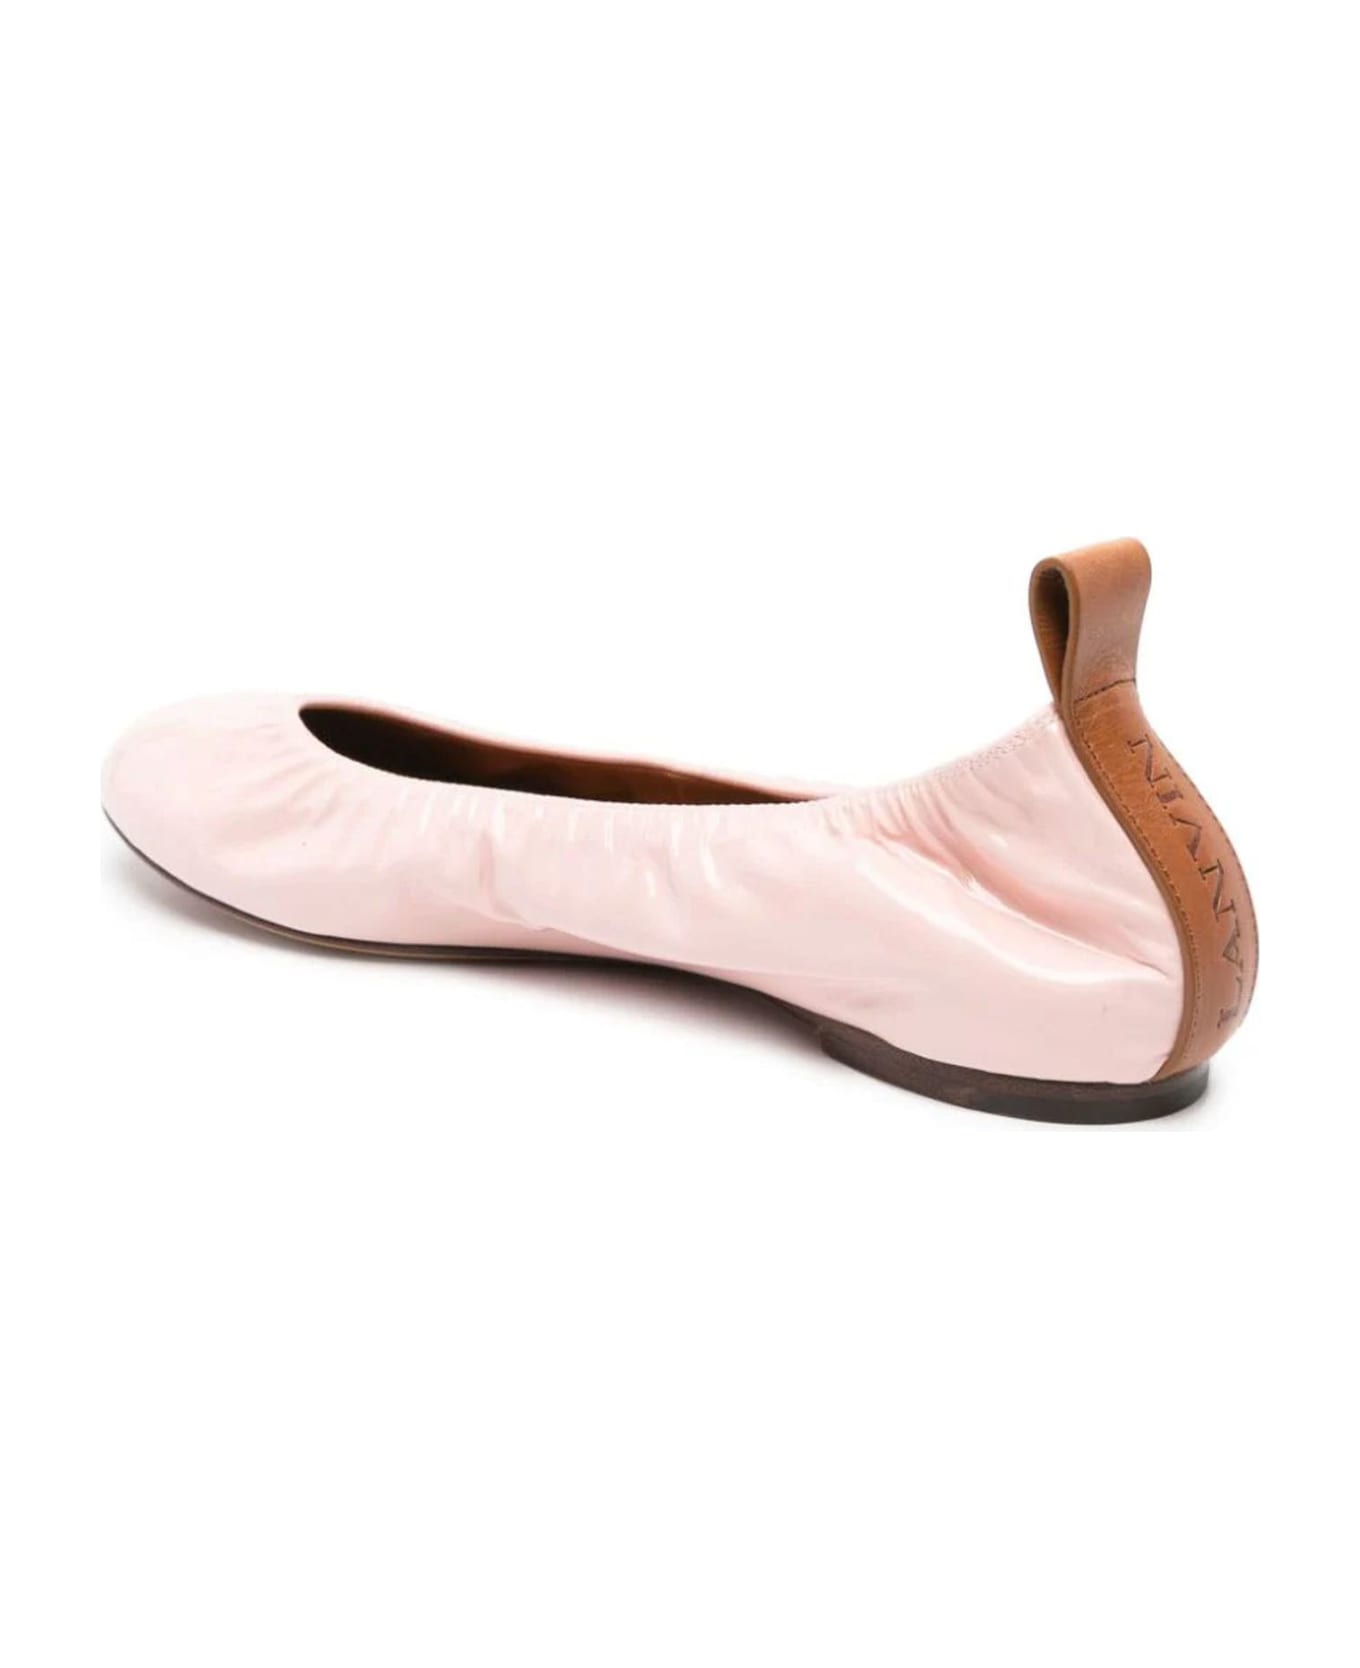 Lanvin Pink Patent Leather Ballerina Shoes - Pink